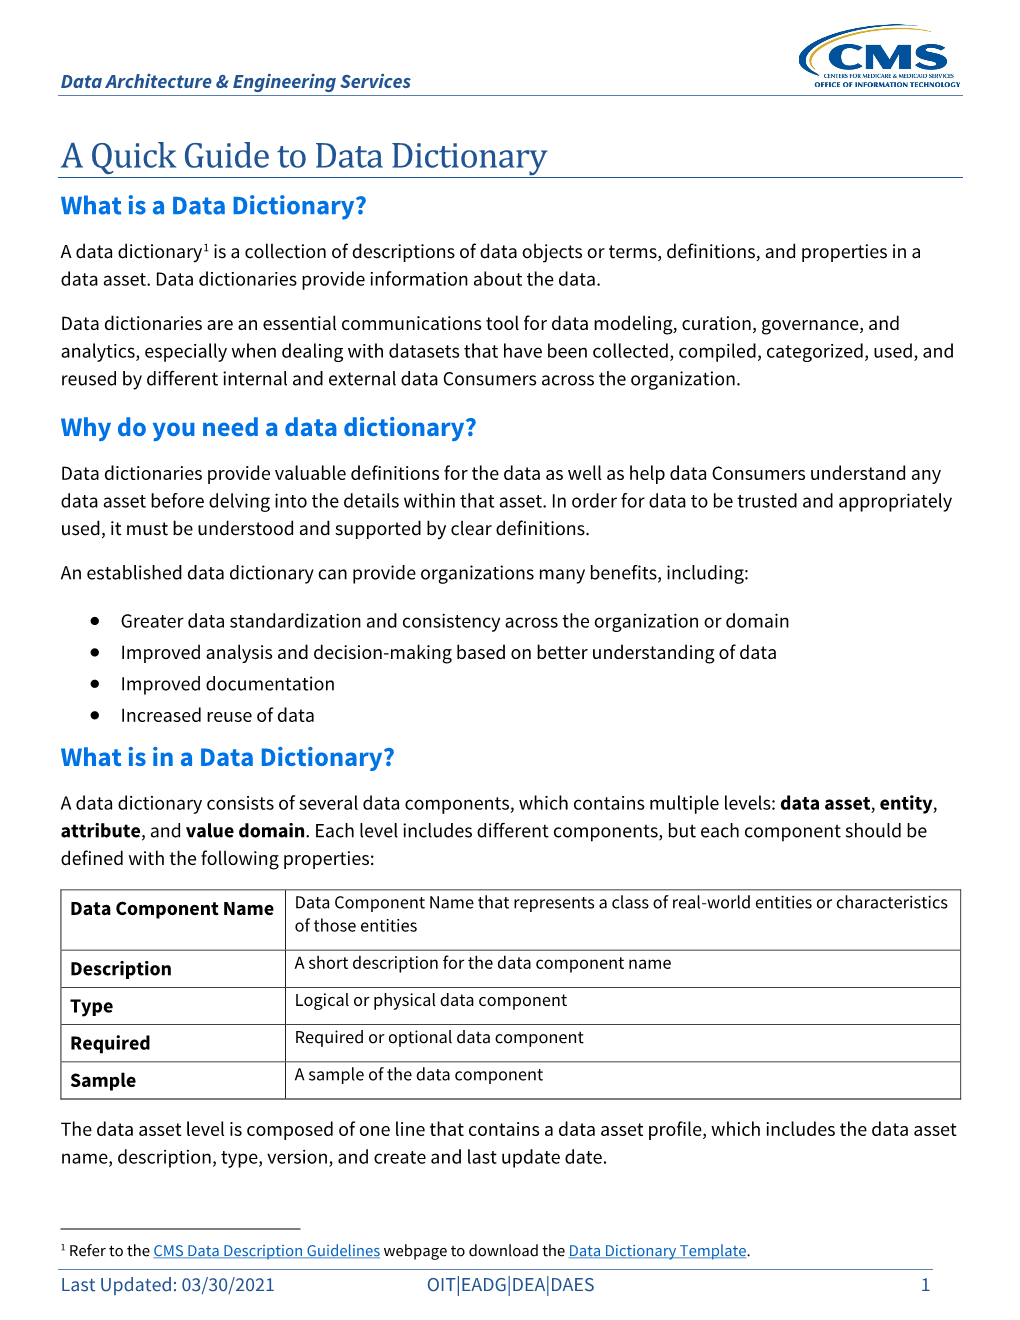 Data Dictionary Quick Reference Guide